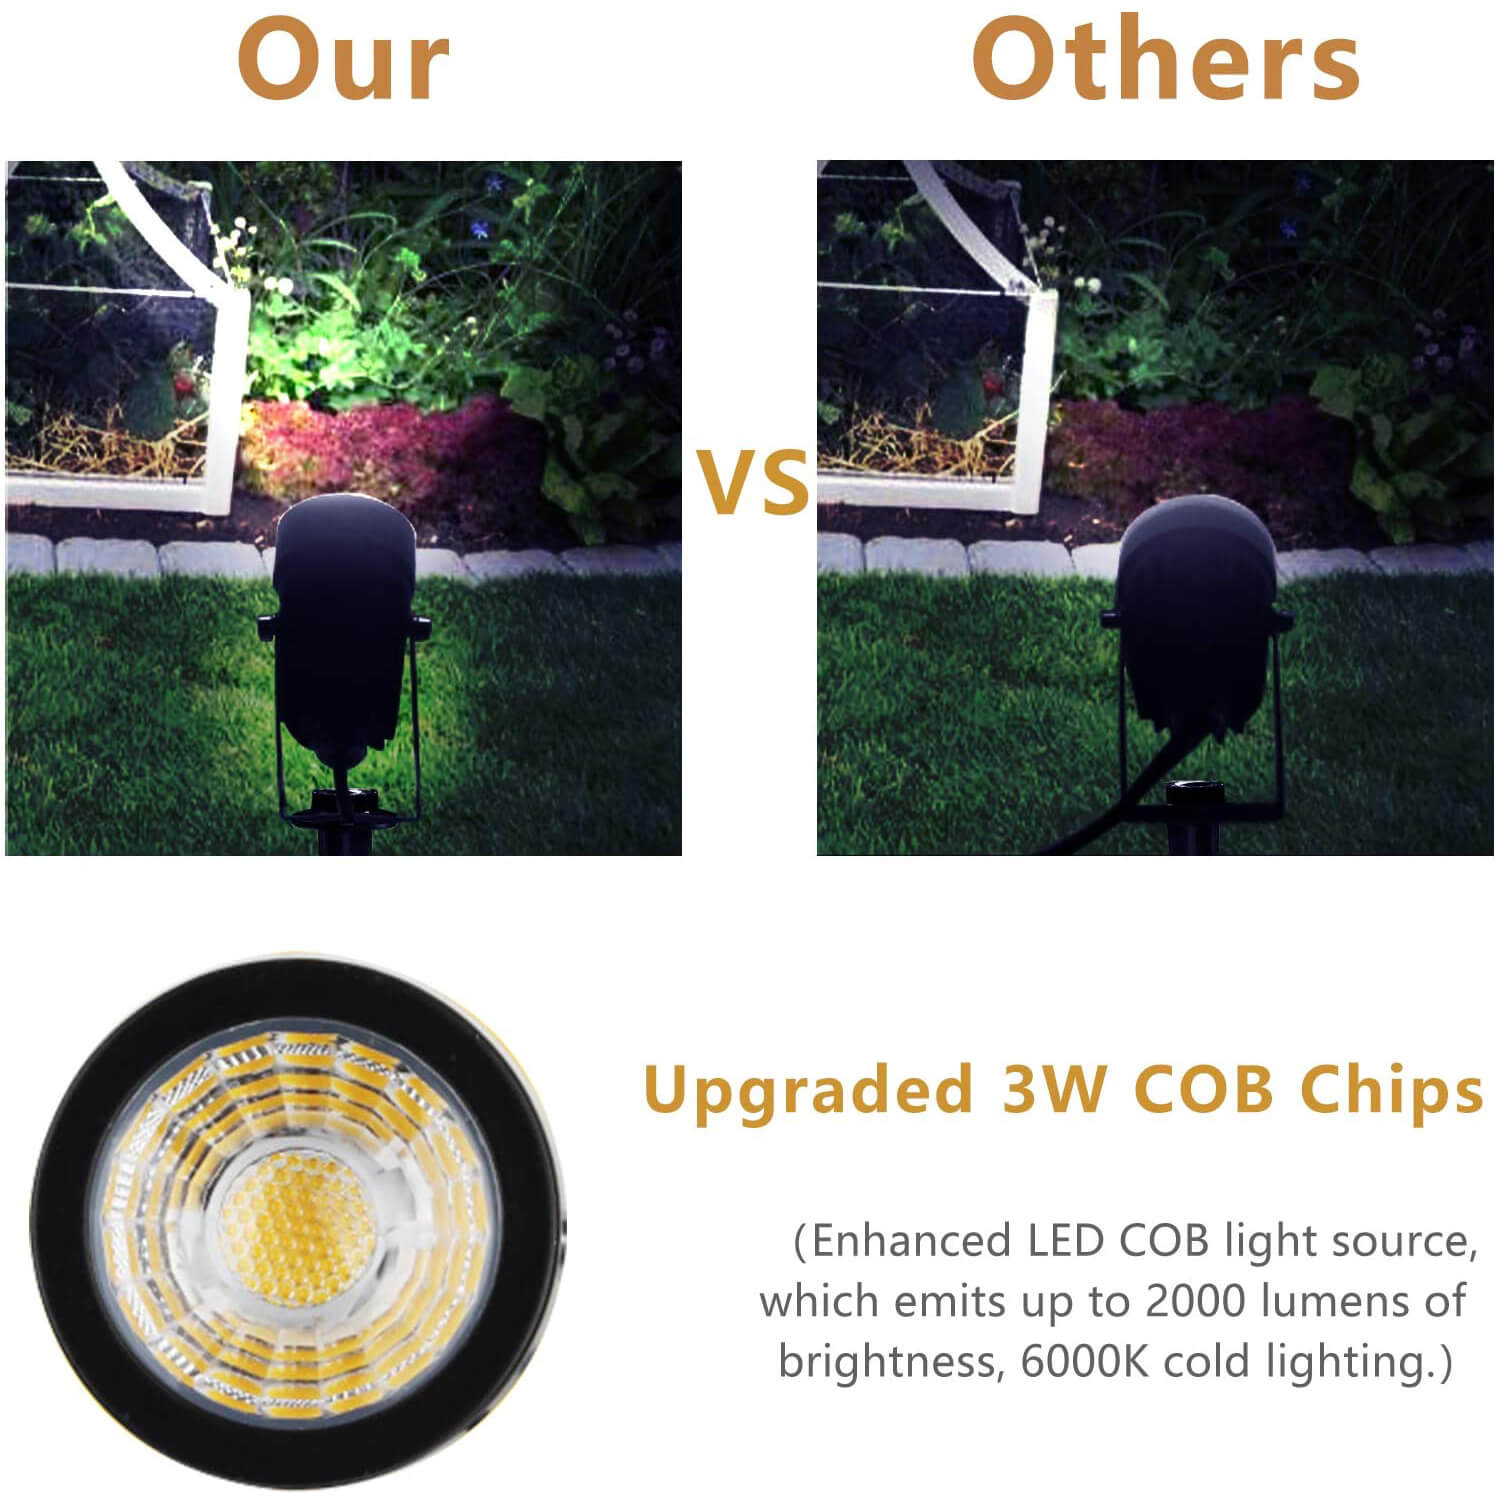 Upgraded 3W COB Chips